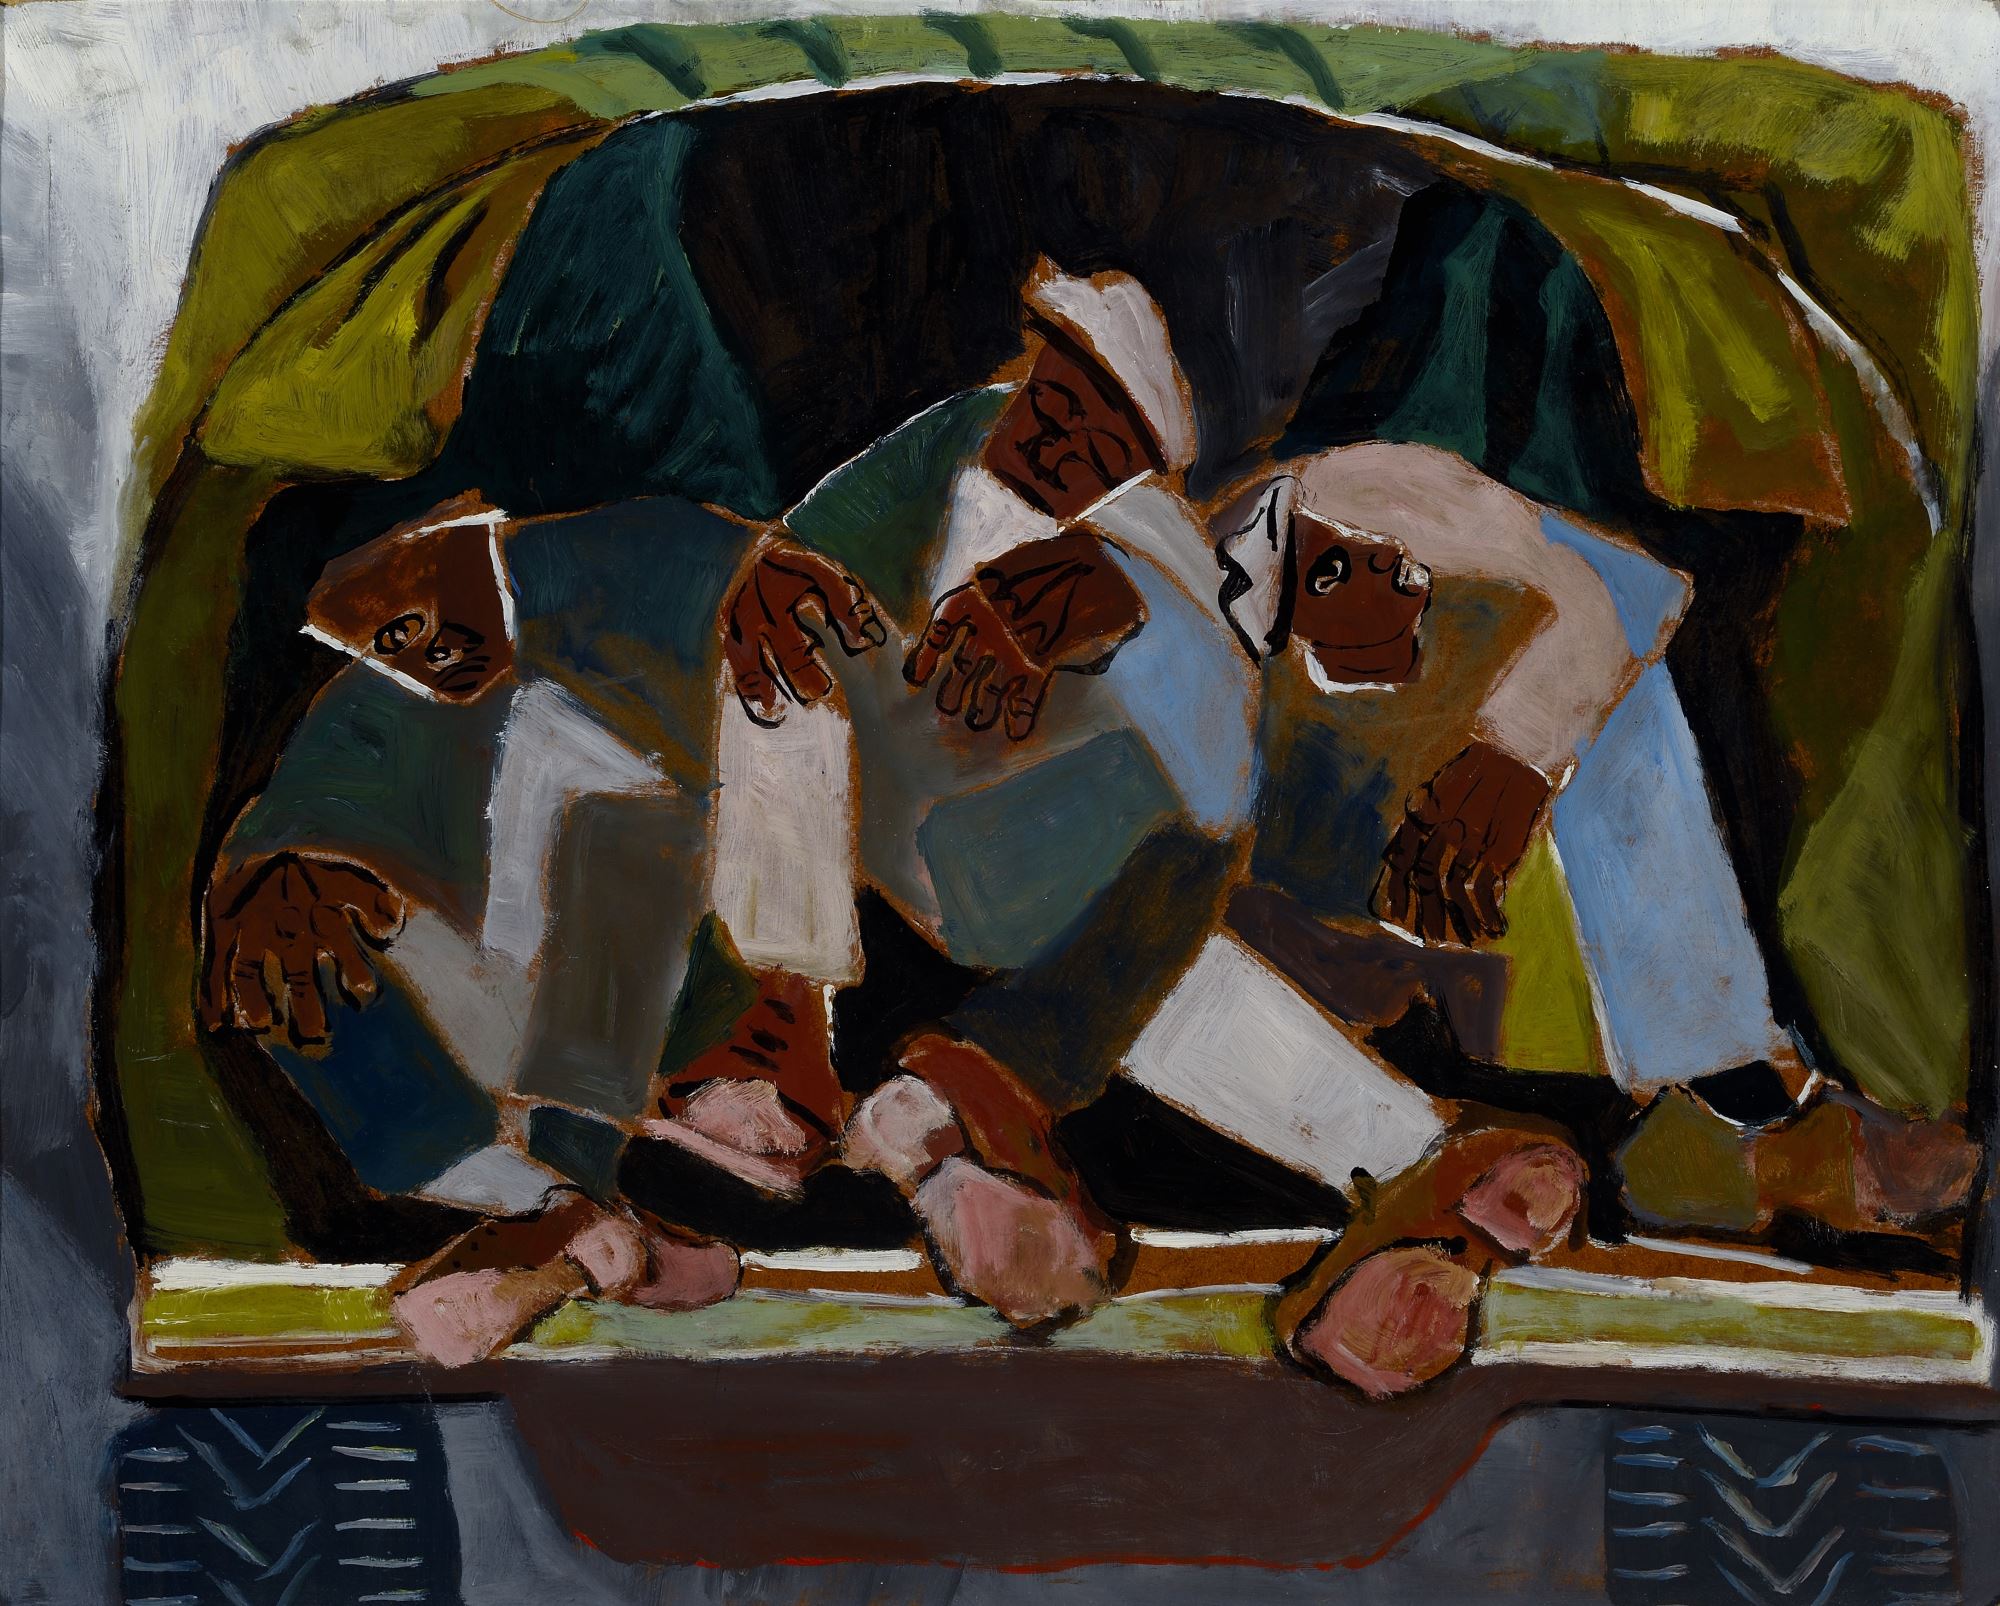 <p>Marianne Manasse, <i>Farm Workers on the Back of a Truck</i>. Oil on Masonite, 24 x 30 inches. Collection of the Nasher Museum of Art at Duke University.</p>
